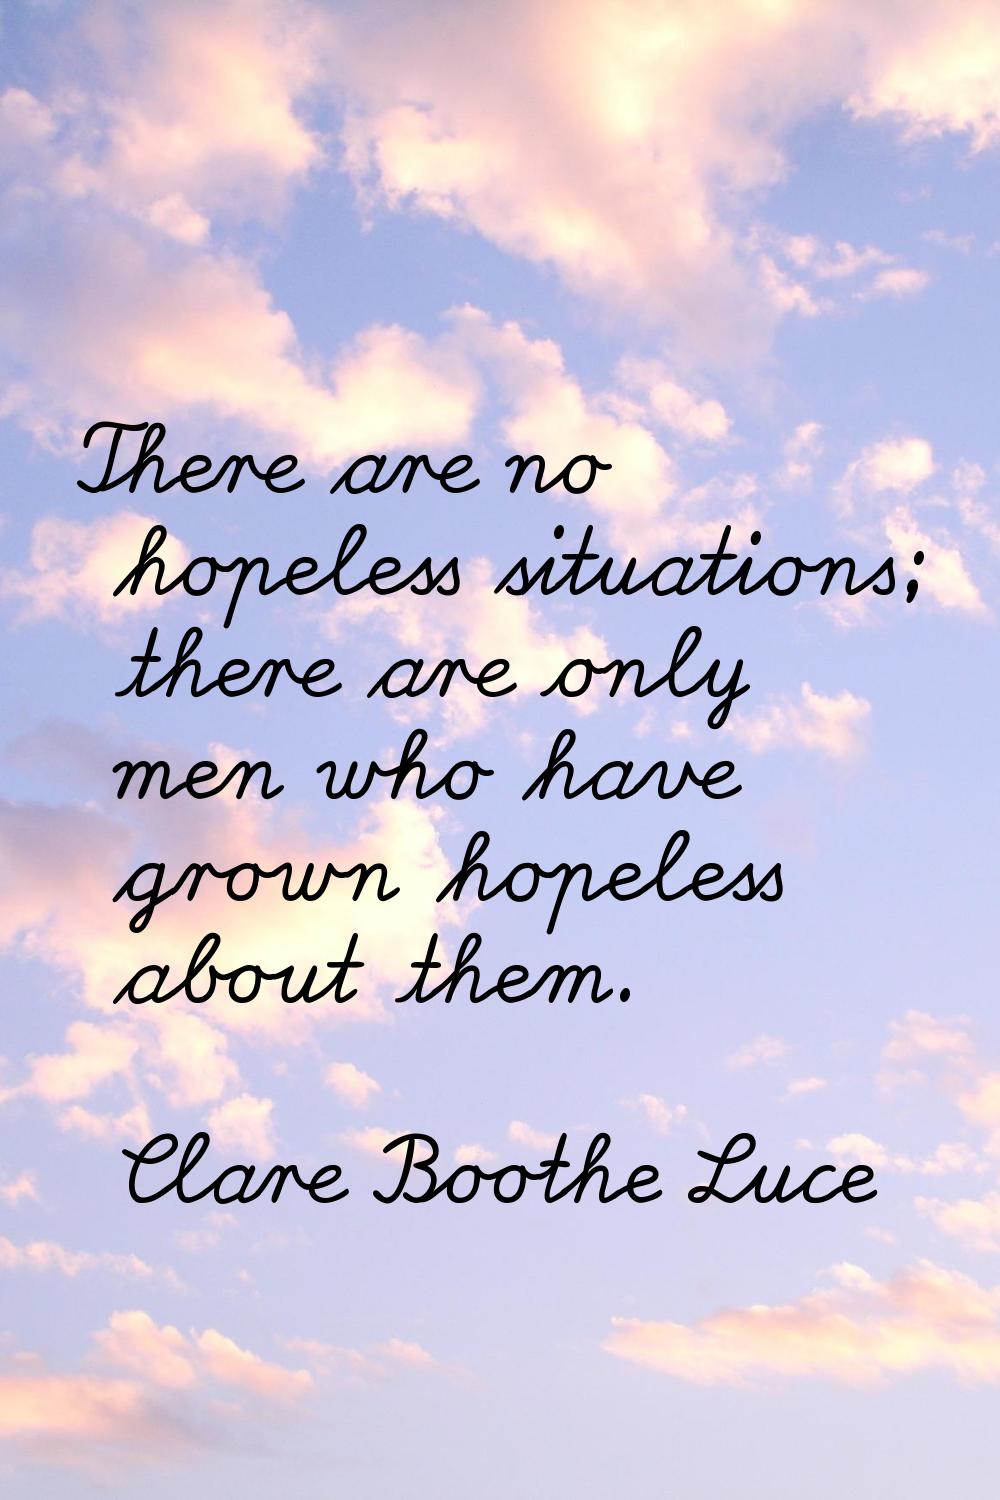 There are no hopeless situations; there are only men who have grown hopeless about them.